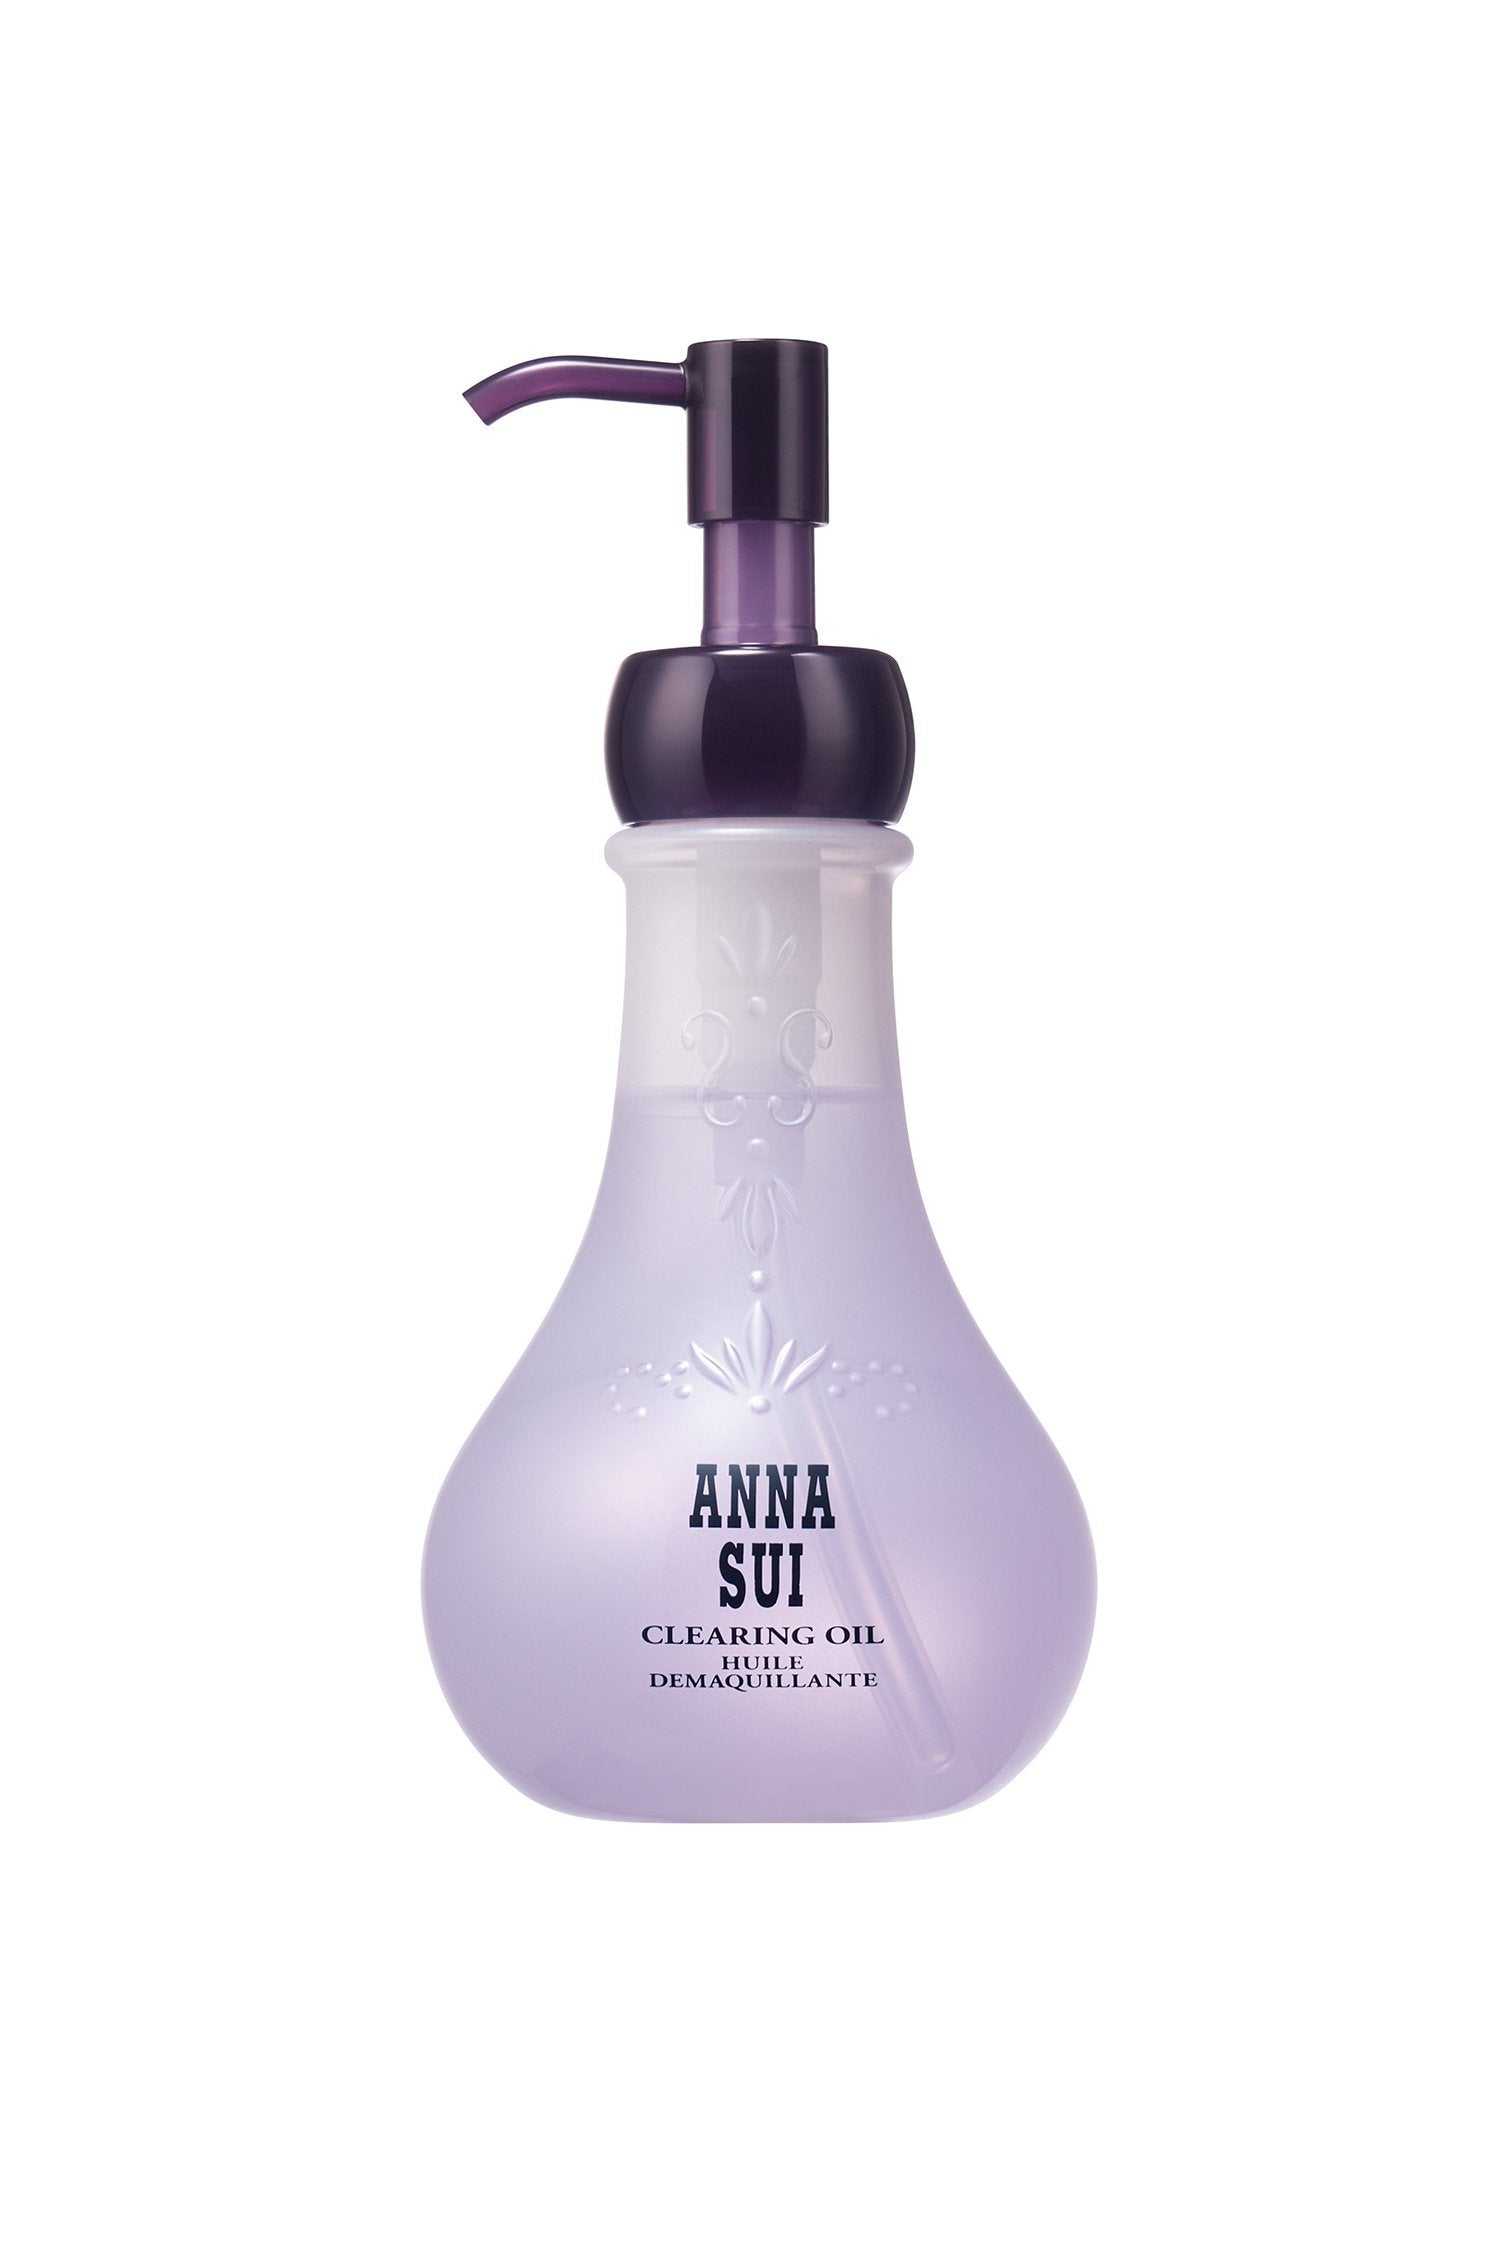 Clearing Oil - Anna Sui